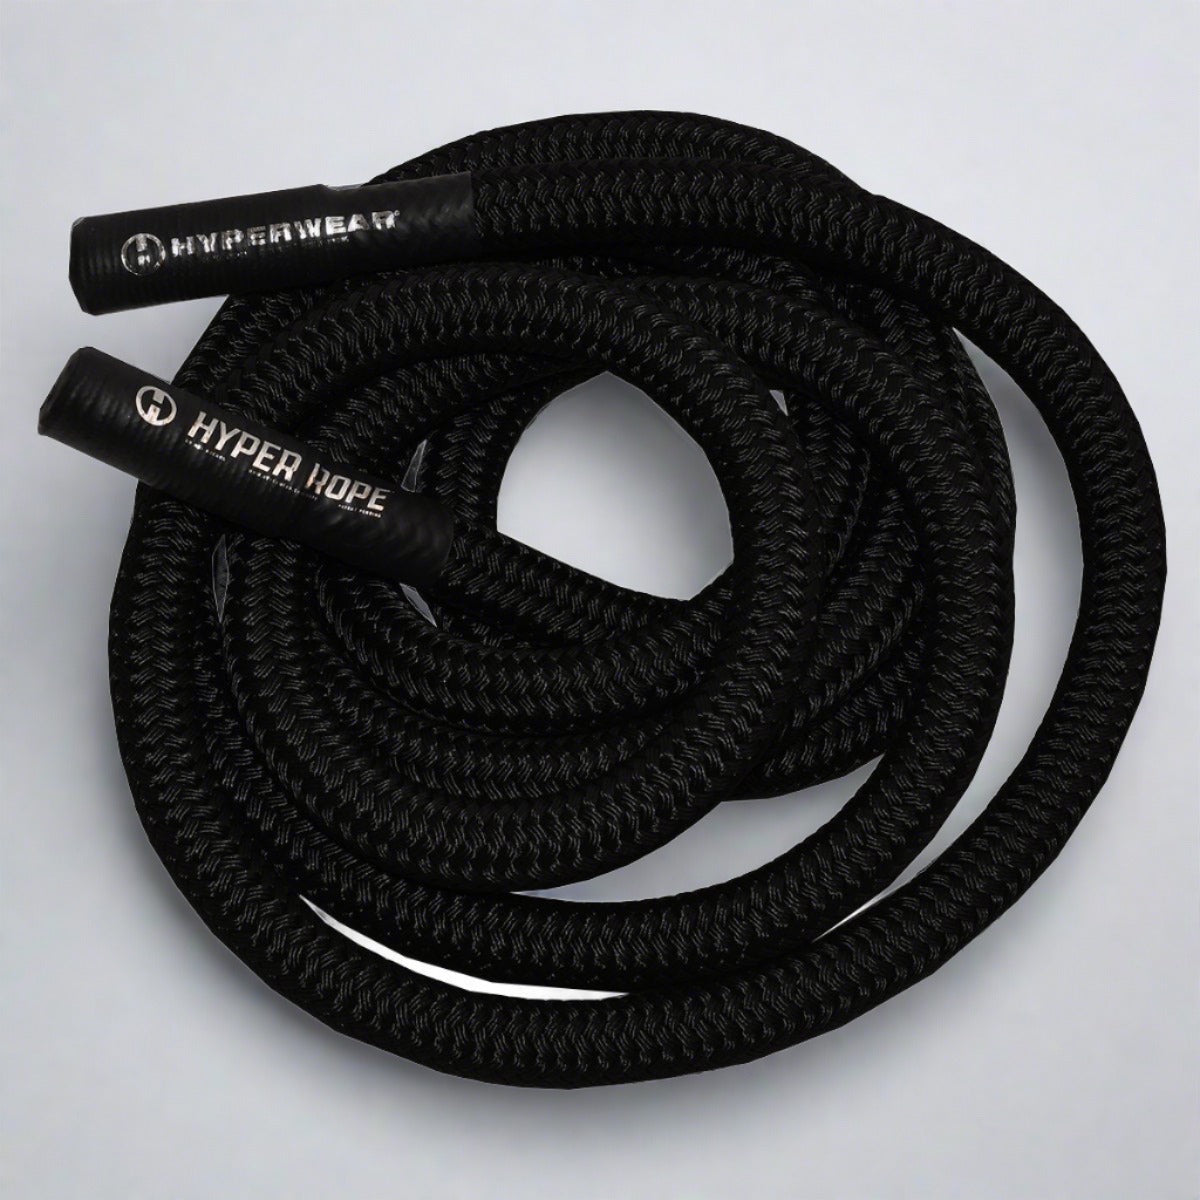 product photo of coiled Hyper Rope ELITE weighted battle rope